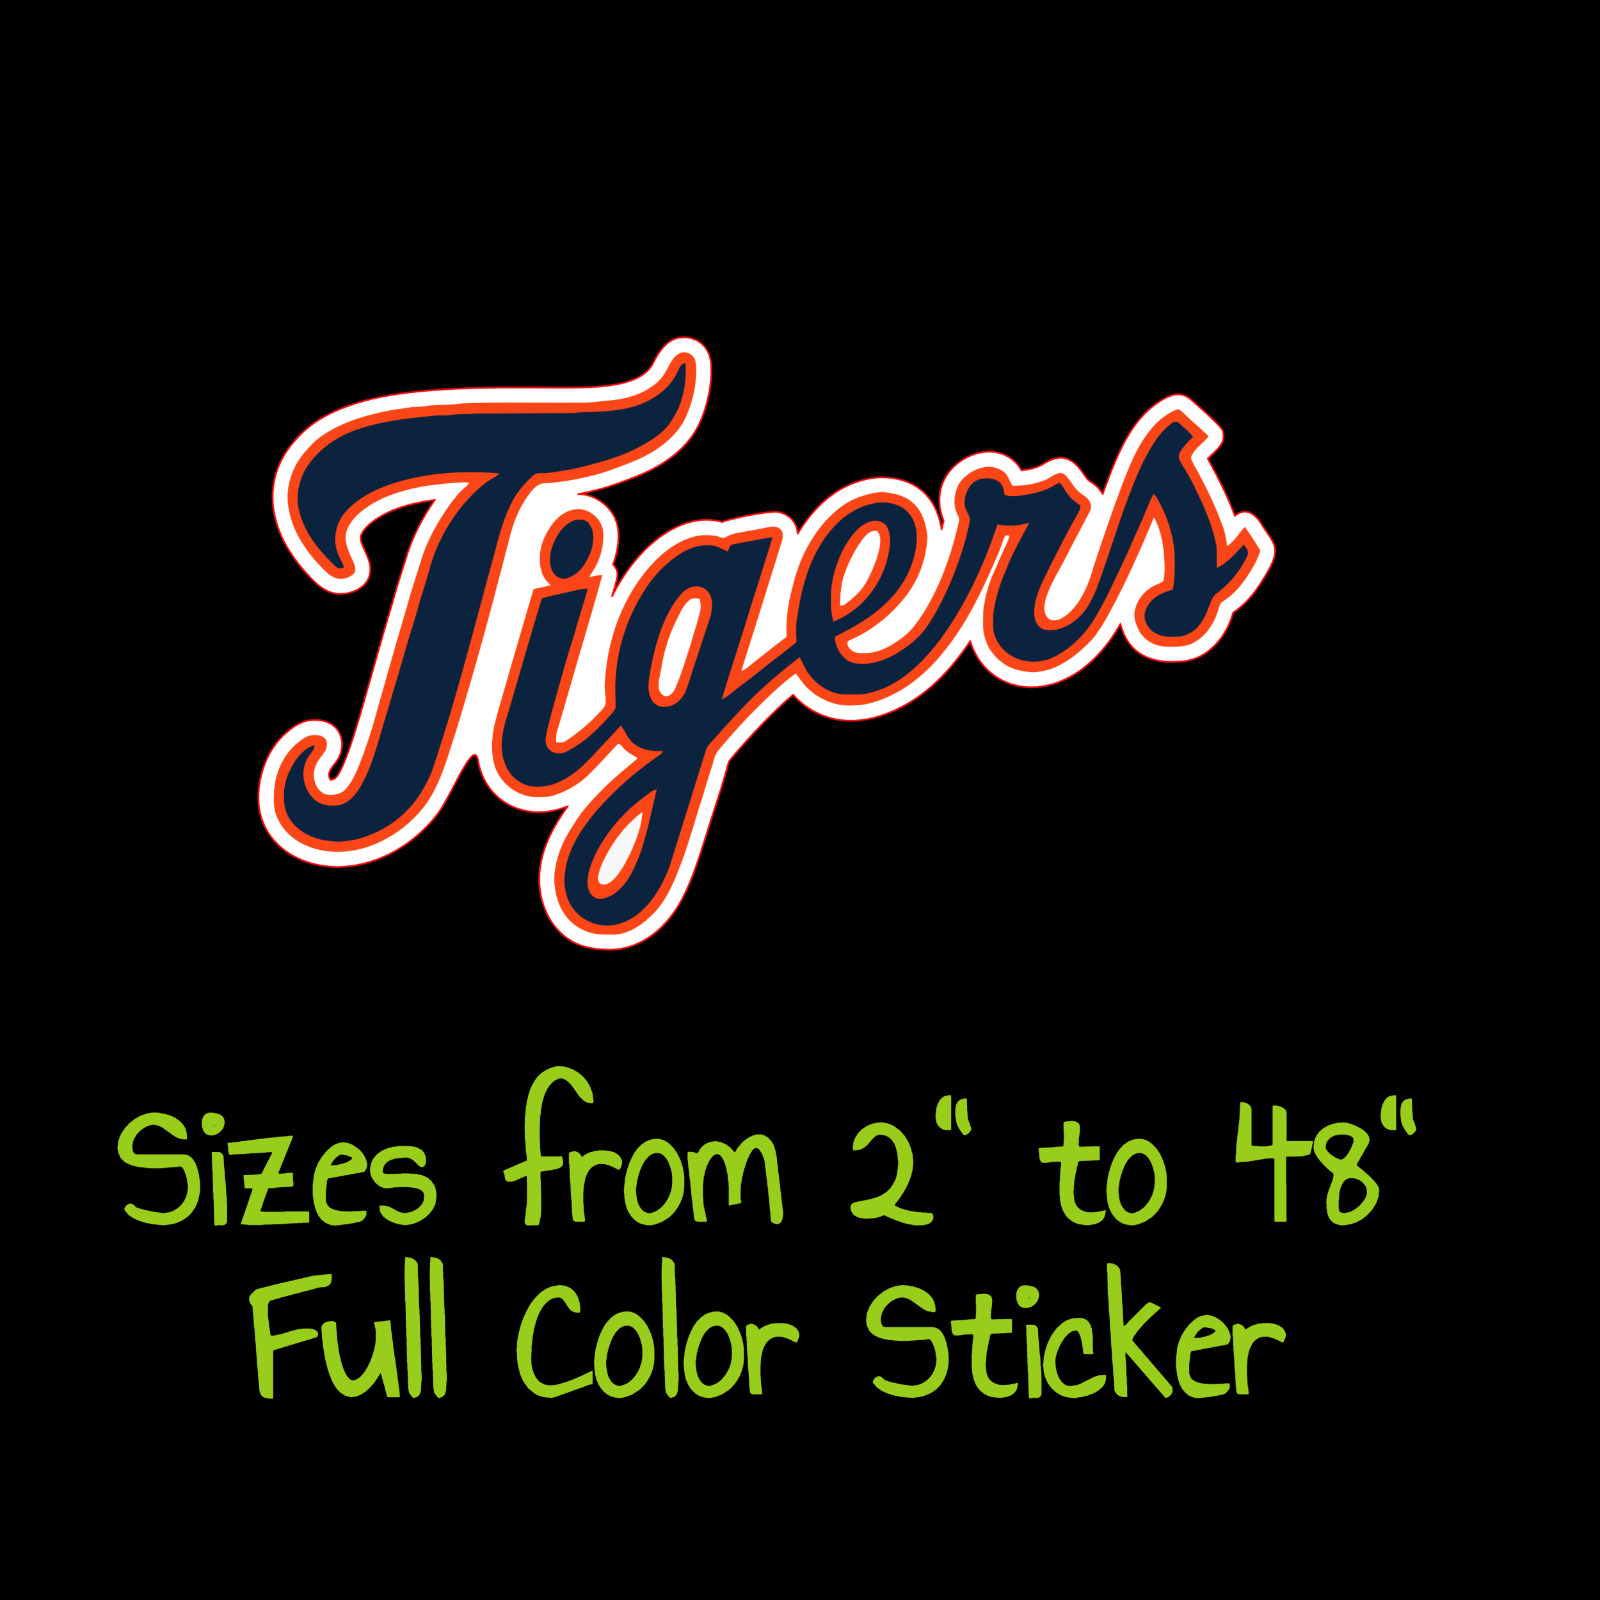 Detroit Tigers Full Color Vinyl Decal | Hydroflask decal | Cornhole decal 4